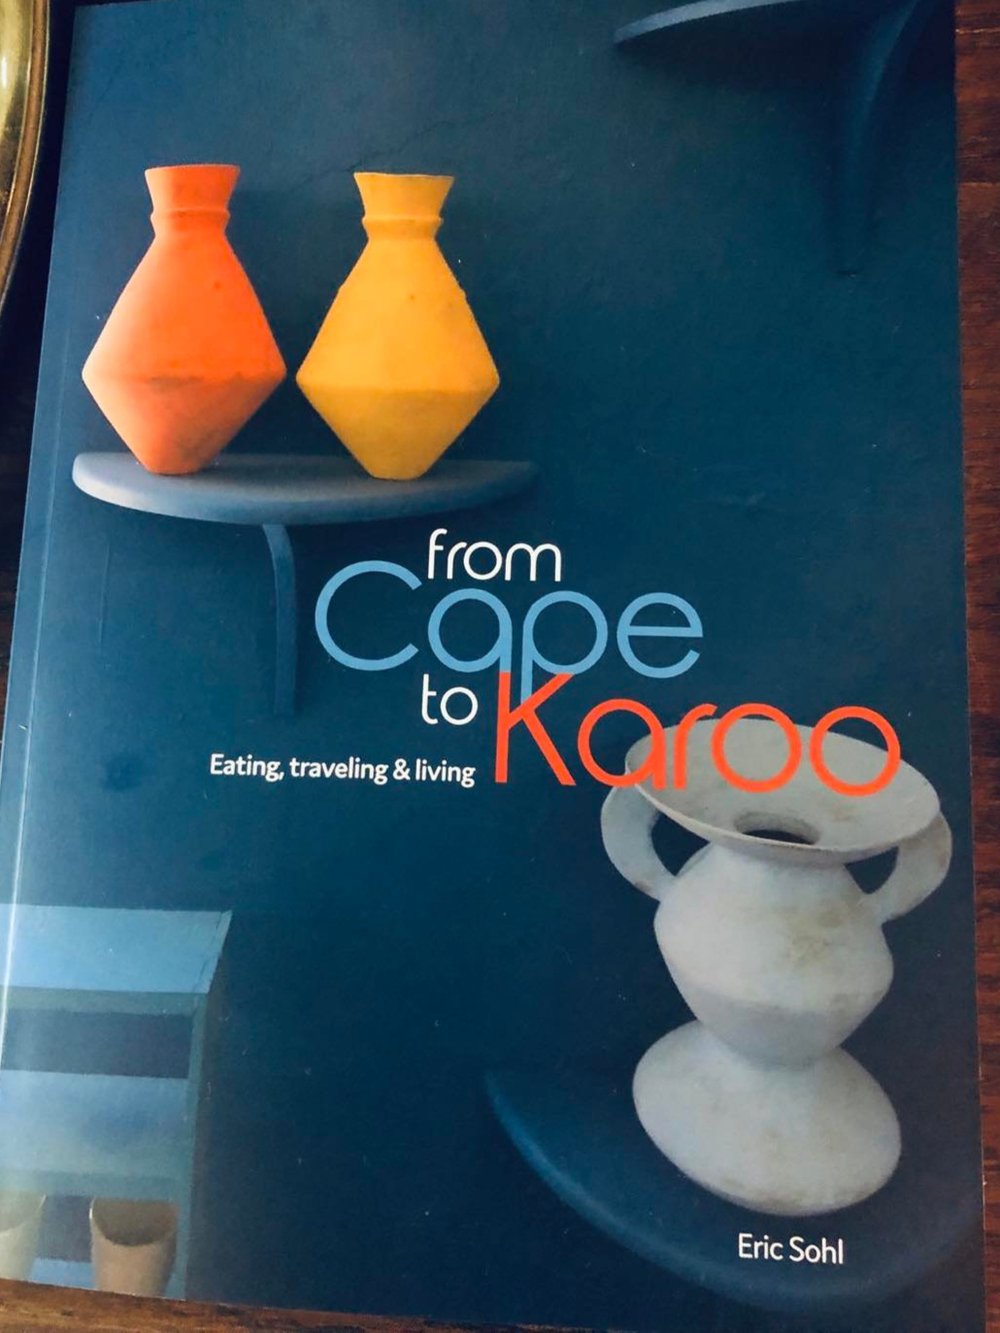 Limited edition: From Cape to Karoo - signed edition